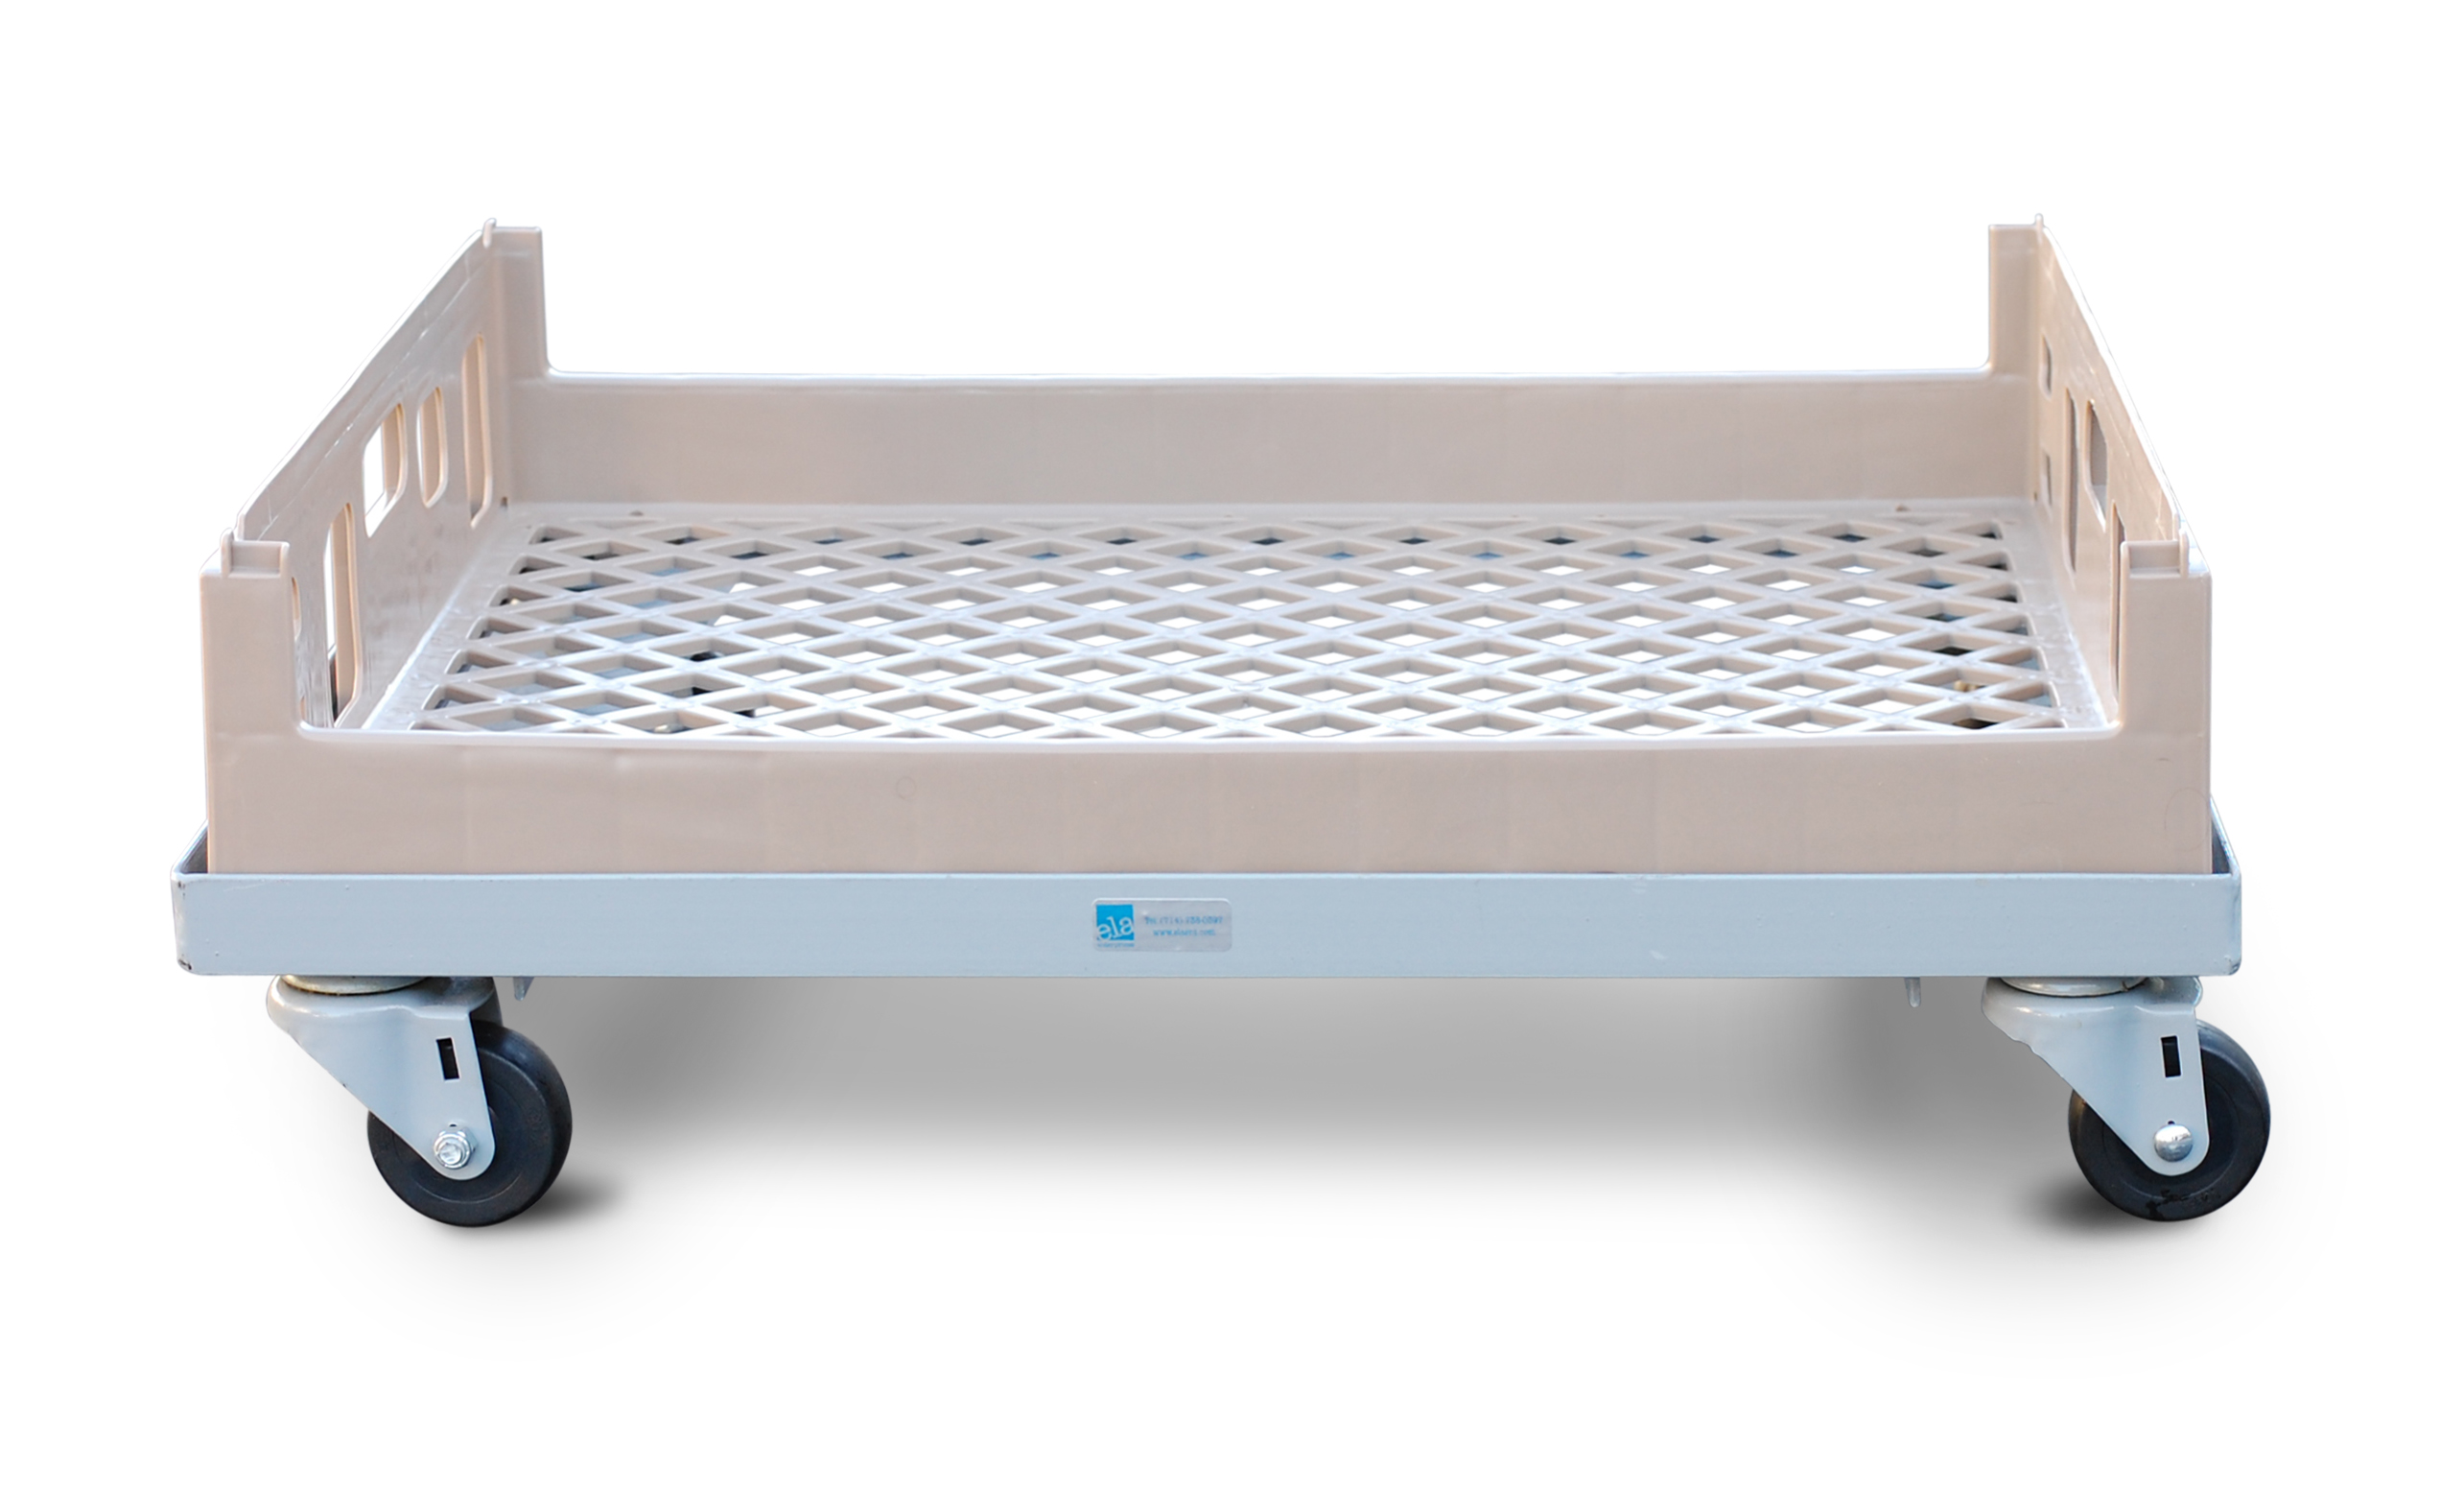 dy30270700-and-dyjm3027052a-pup-ss-dolly-for-ct29260922-chilltray-stack-and-nest-food-handling-container